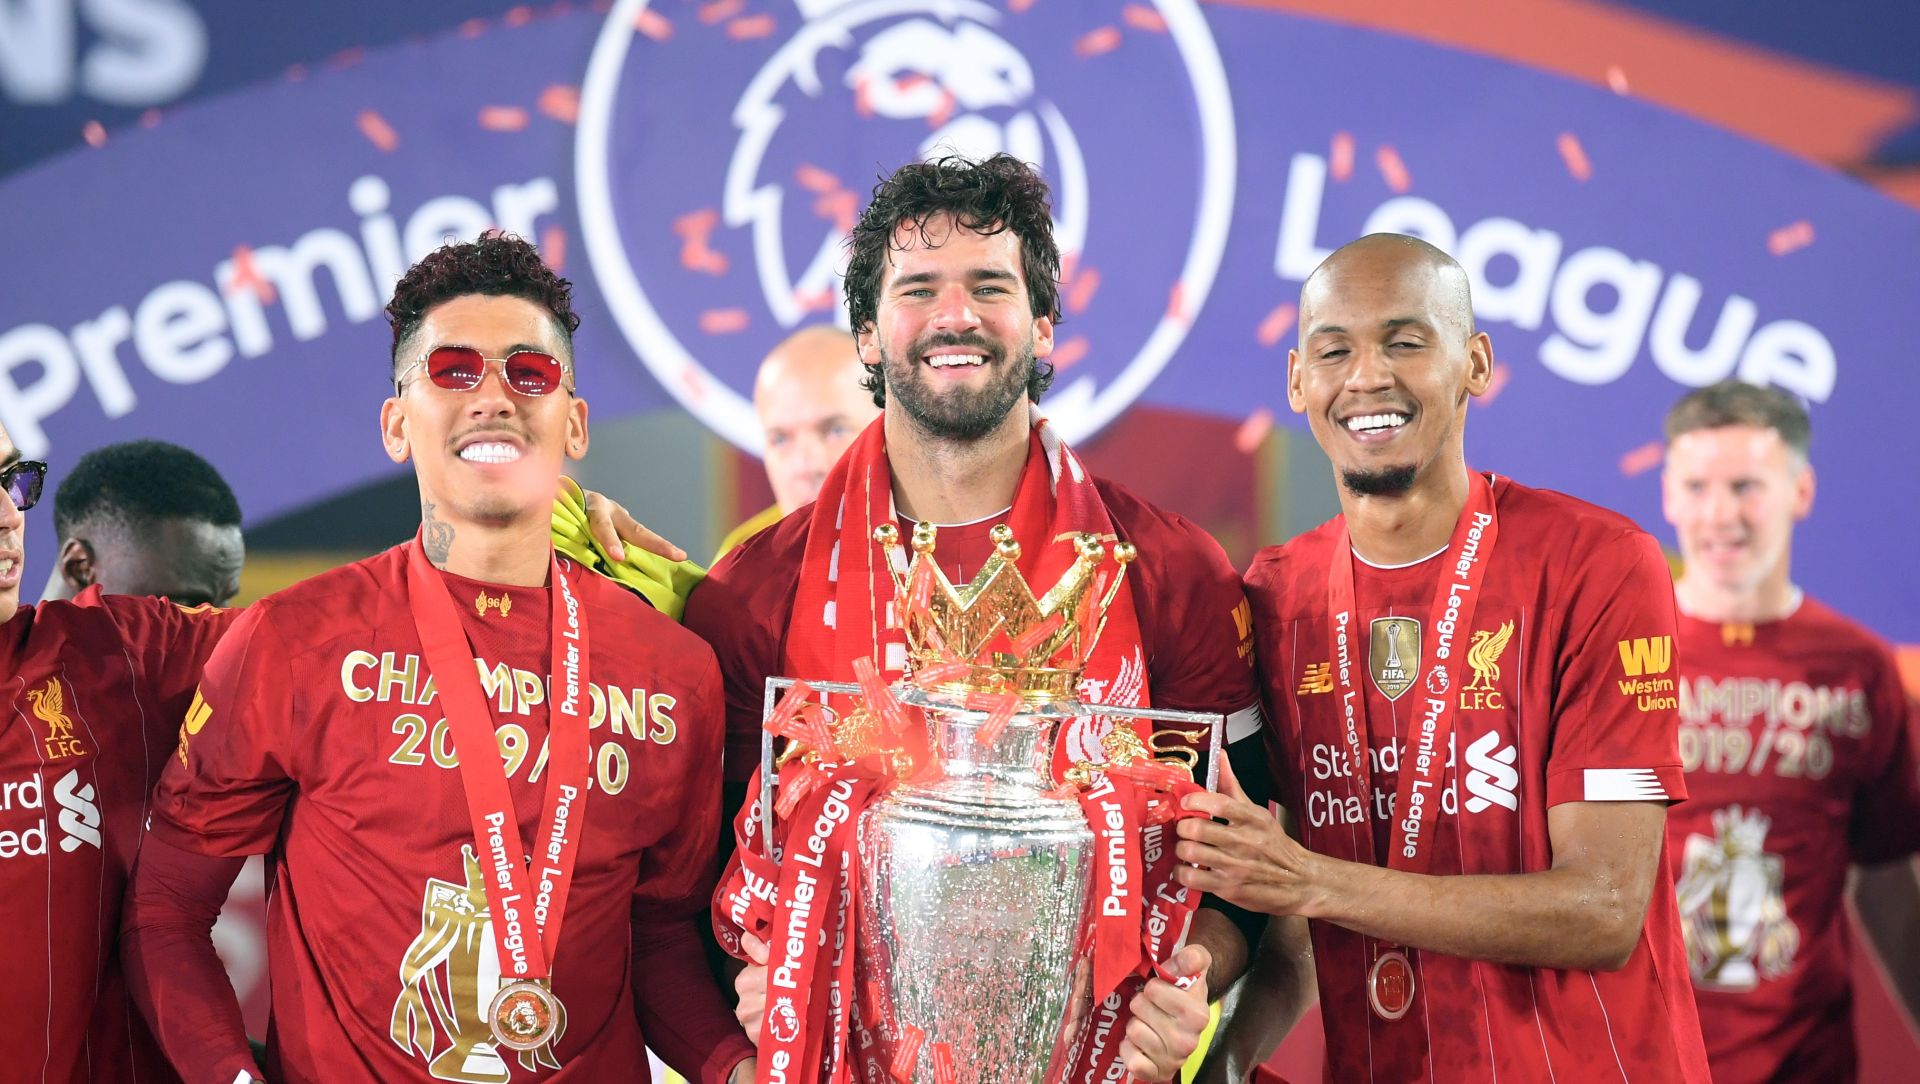 epa08562253 Liverpool's Brazilian players (L-R), Roberto Firmino, Alisson Becker and Fabinho celebrate with the trophy the Premier League 2020 title following the English Premier League soccer match between Liverpool FC and Chelsea FC in Liverpool, Britain, 22 July 2020.  EPA/Laurence Griffiths/NMC/Pool EDITORIAL USE ONLY. No use with unauthorized audio, video, data, fixture lists, club/league logos or 'live' services. Online in-match use limited to 120 images, no video emulation. No use in betting, games or single club/league/player publications.